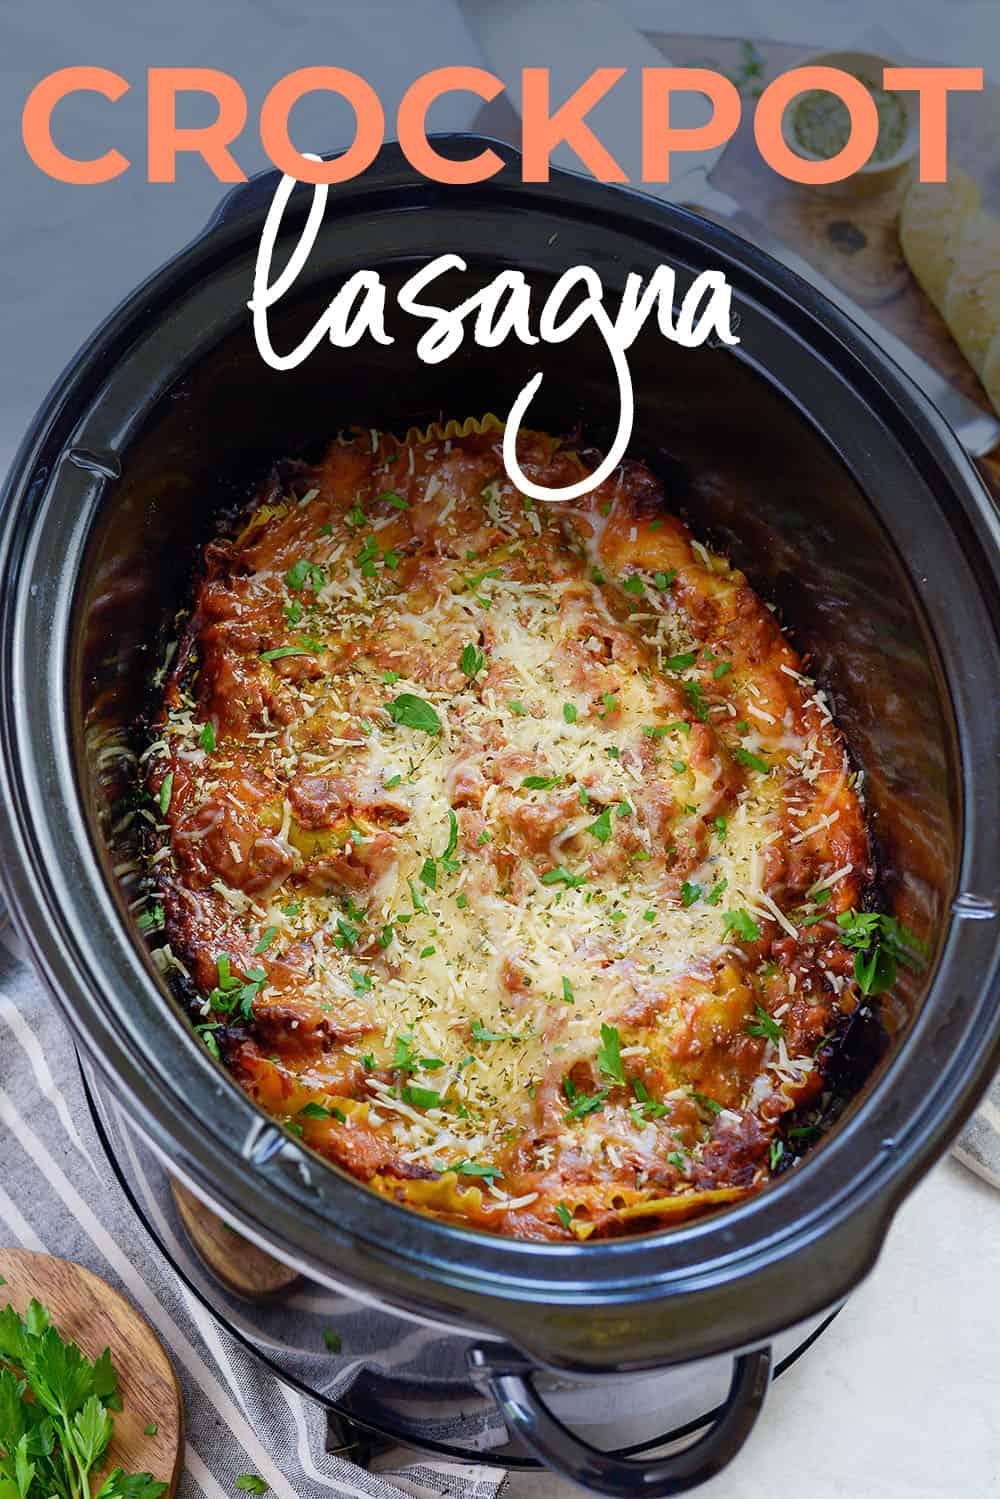 crockpot lasagna recipe in slow cooker with text for pinterest.